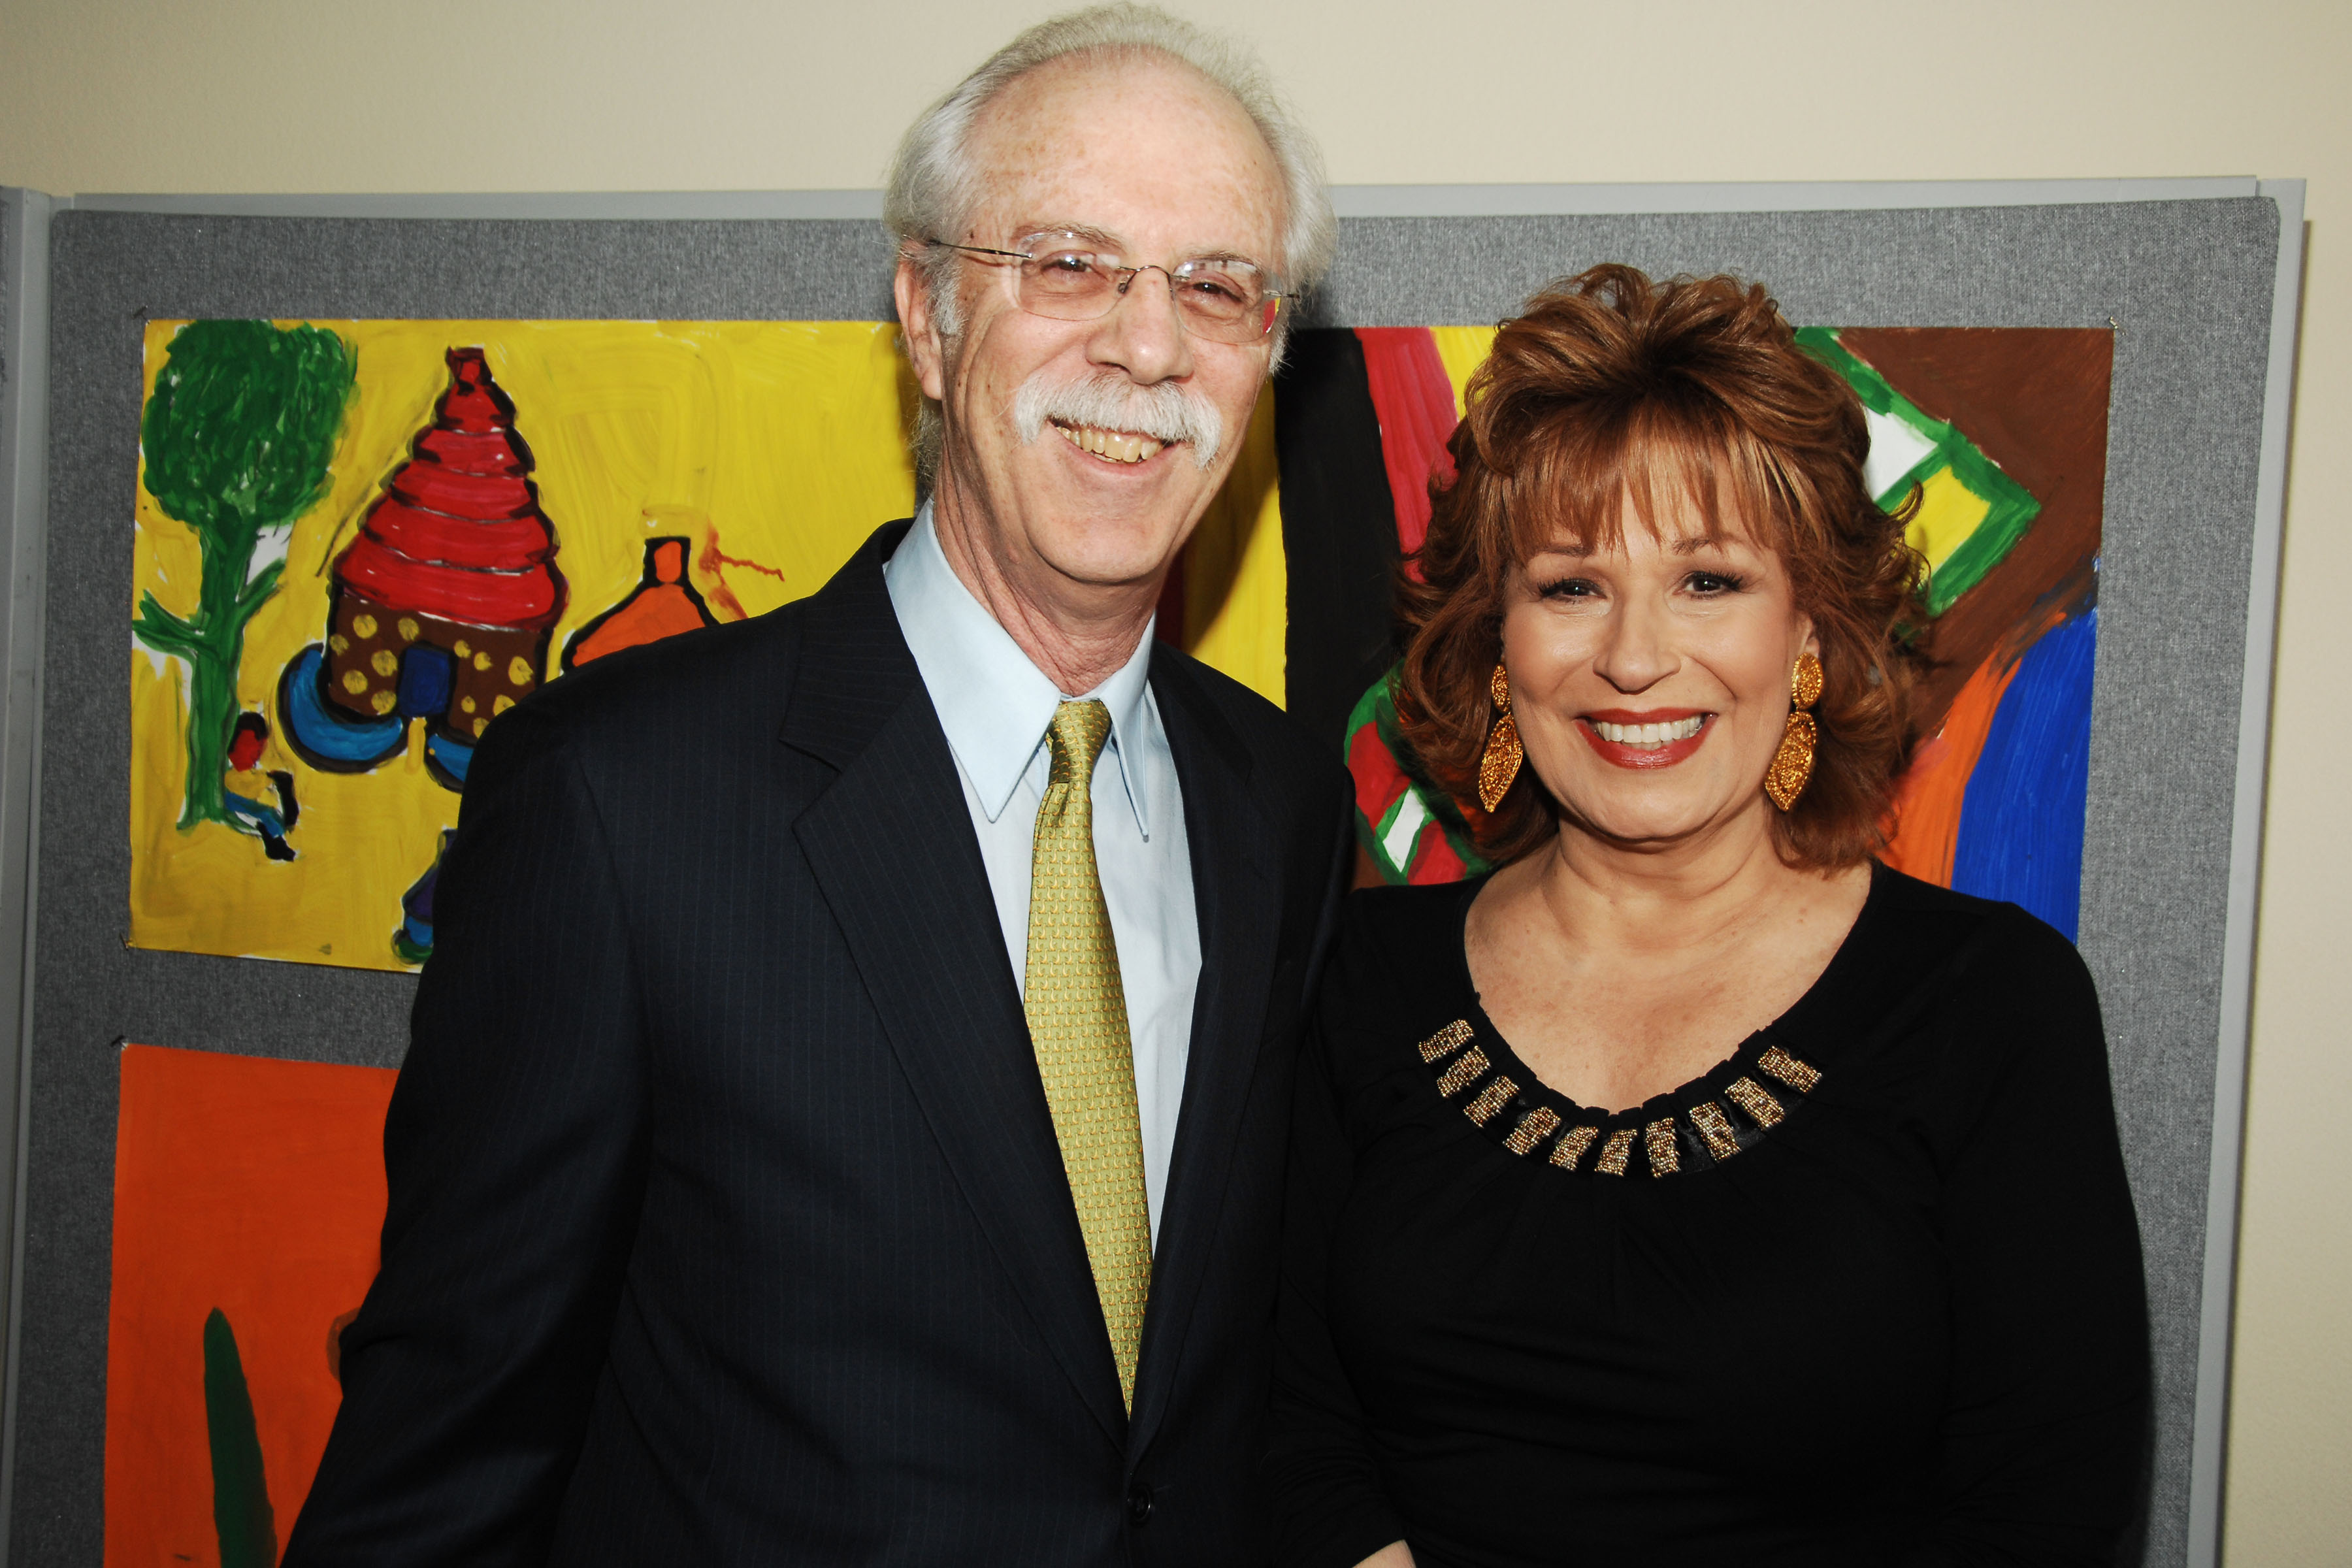 Steve Janowitz and Joy Behar at the Welcome To Gulu Exhibition and Benefit Art Sale Anti-Human Trafficiking Initiative at The United Nations on May 12, 2009 in New York City | Source: Getty Images